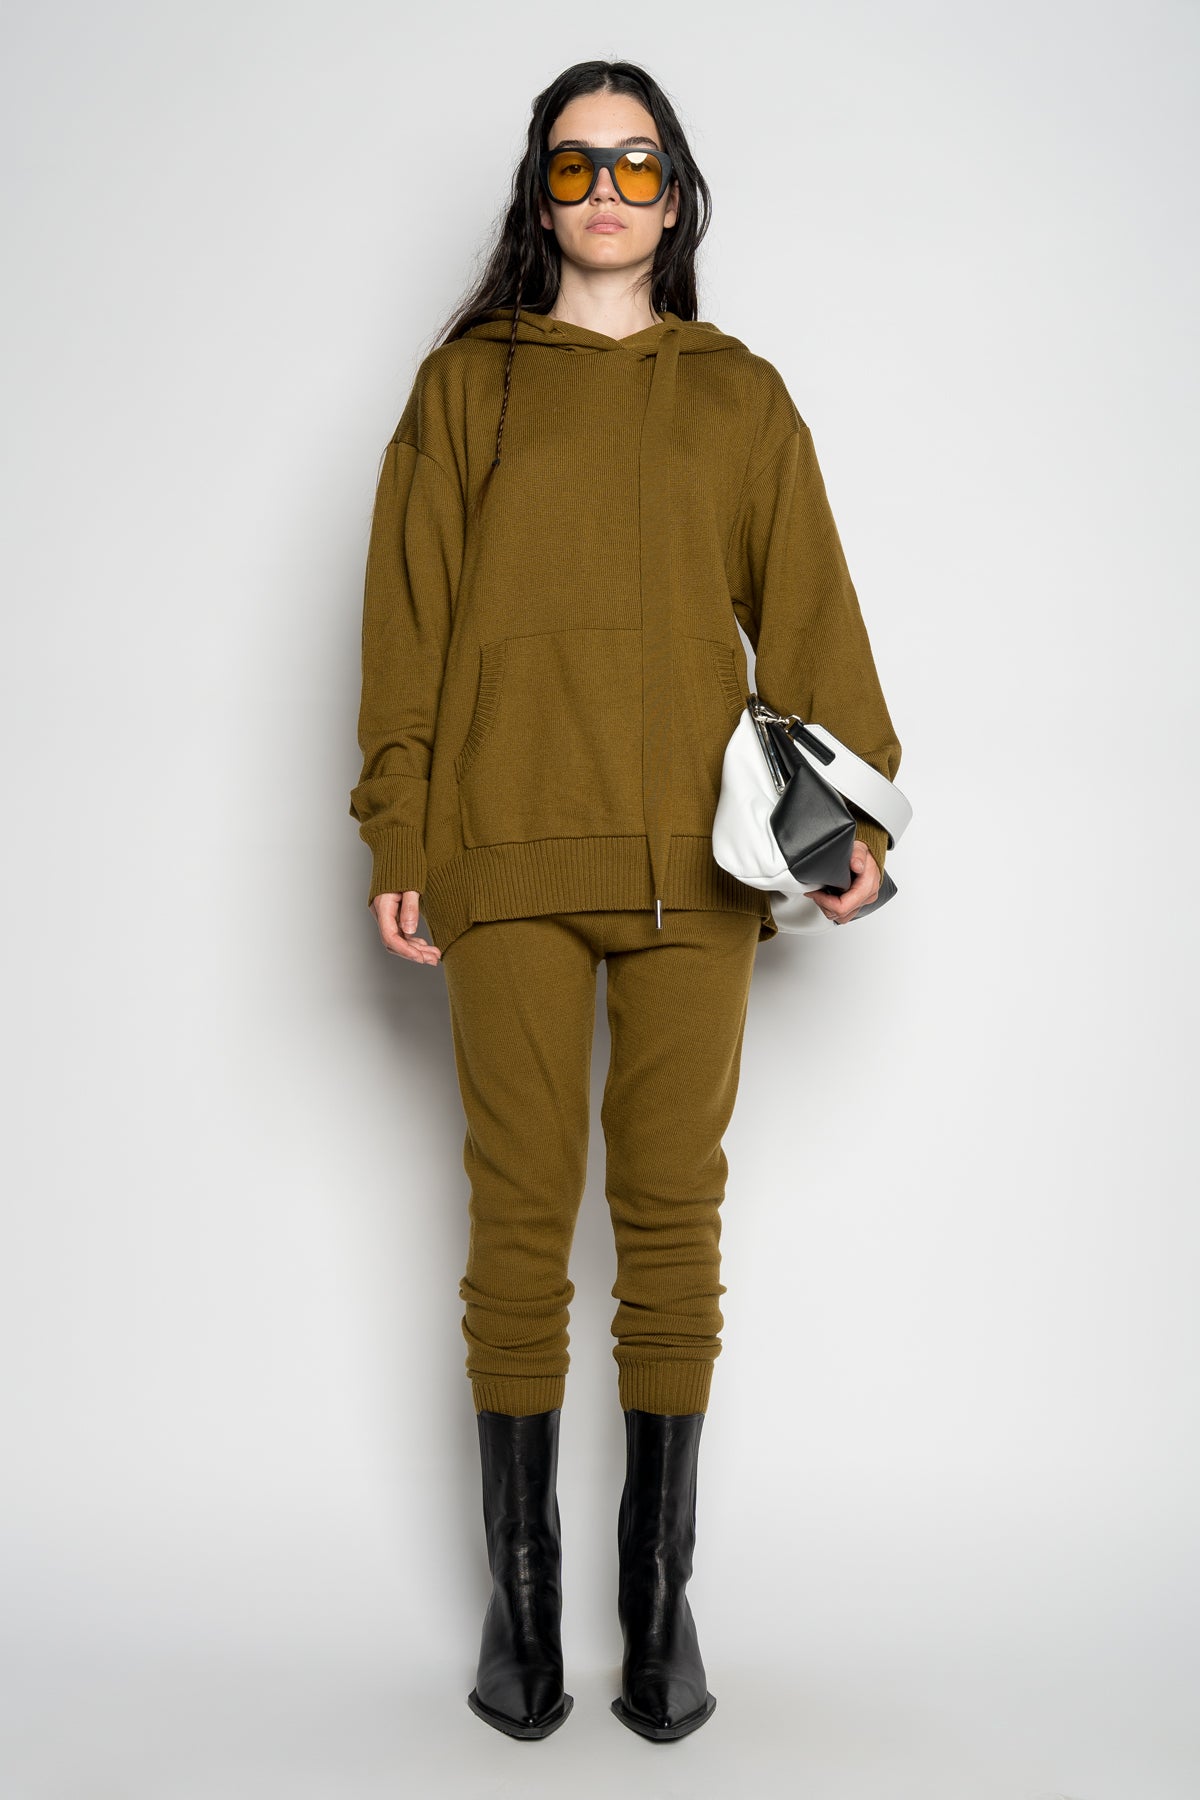 MUSTARD TRACKSUIT TROUSERS marques almeida